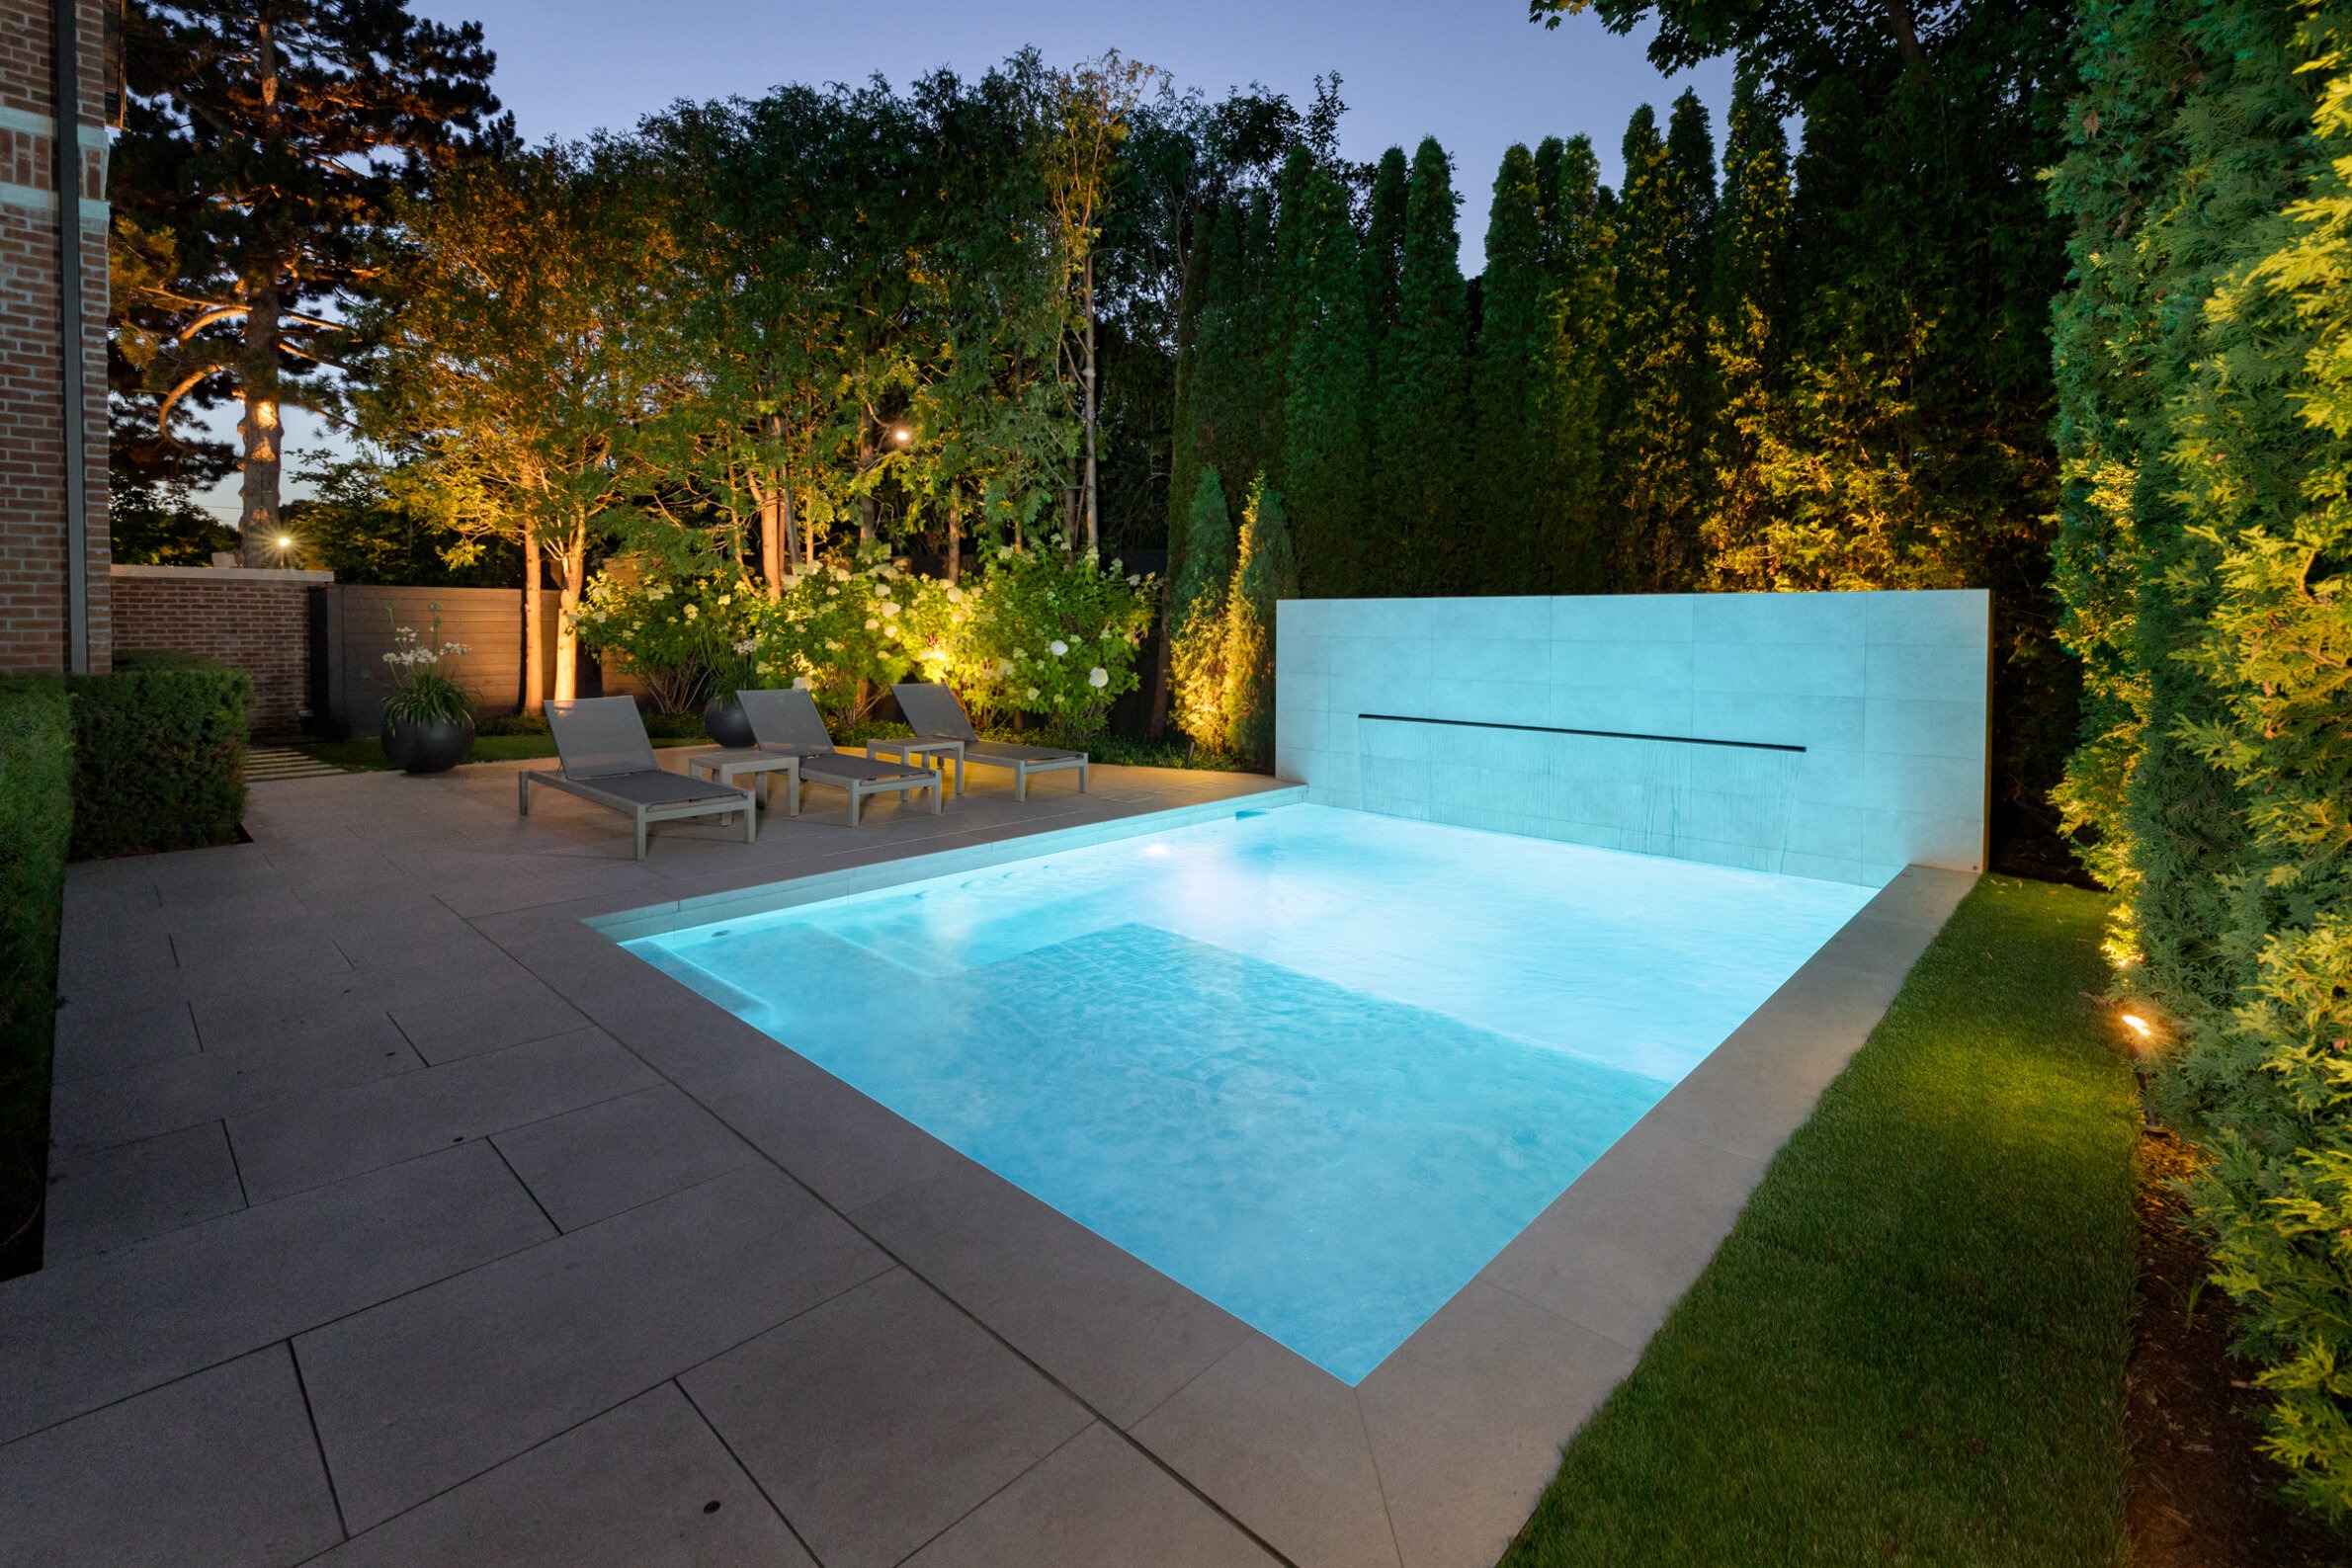 Modern outdoor swimming pool illuminated at dusk, surrounded by neatly landscaped garden, trees, and lounging chairs on a patio, exuding tranquility.